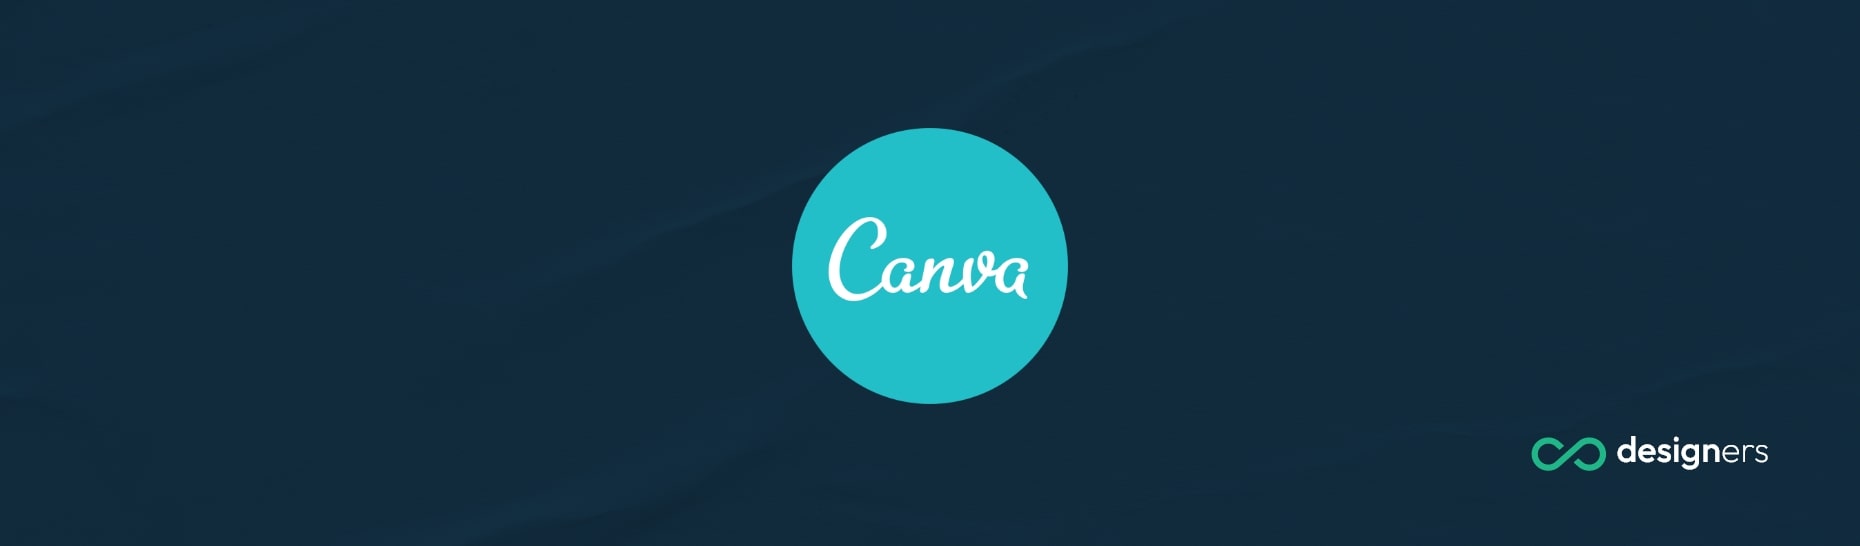 Is Paid Canva Worth It?